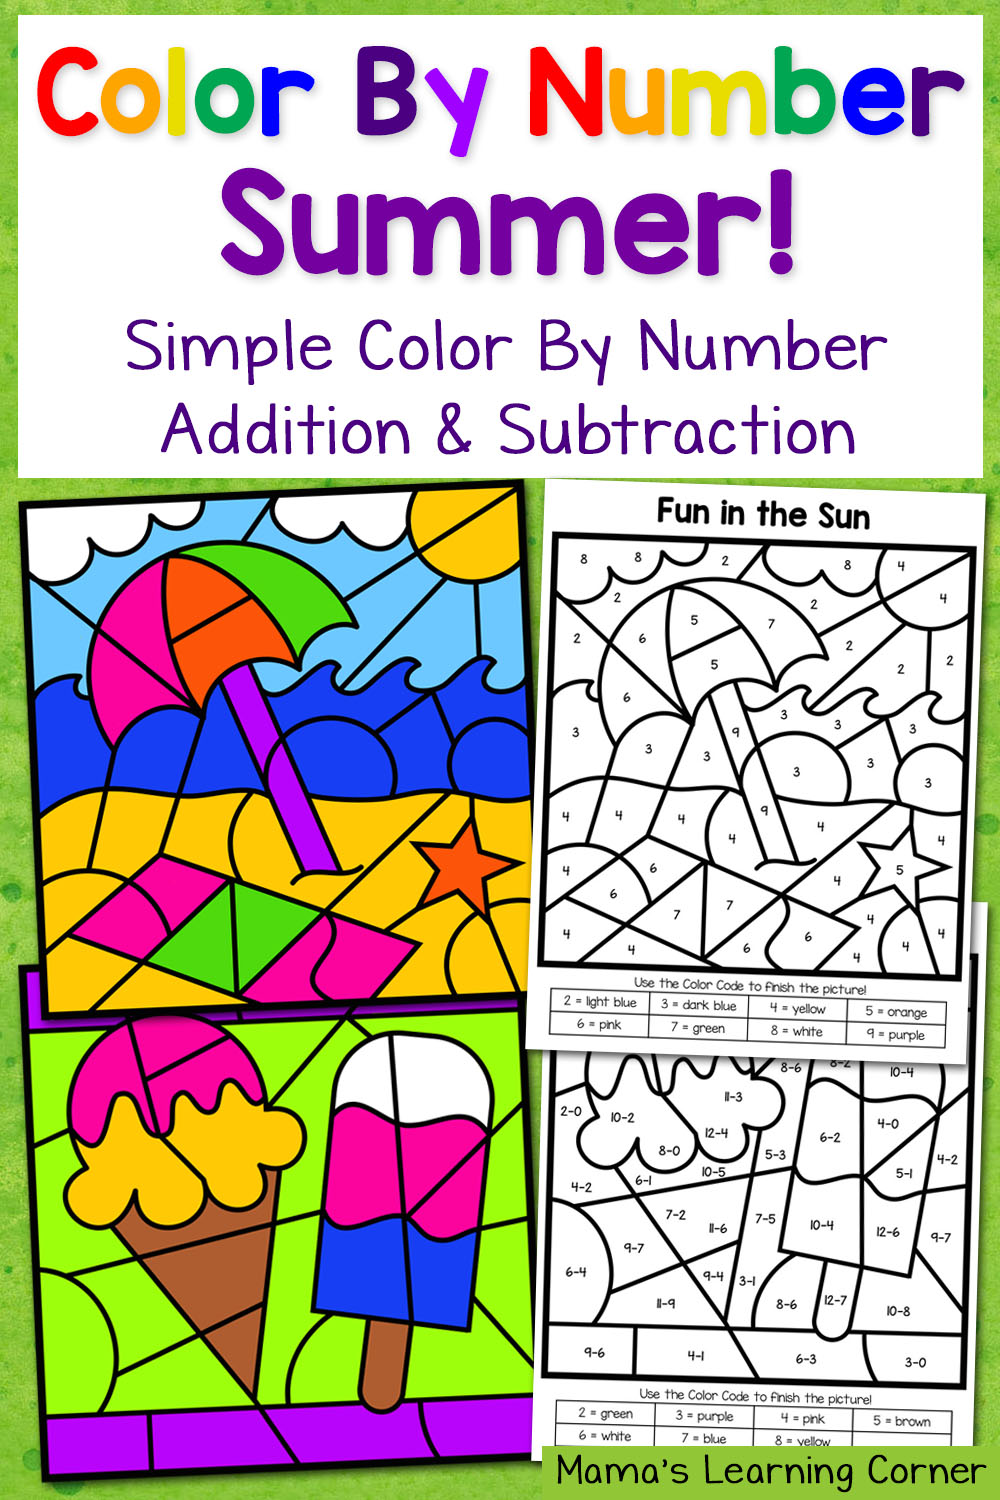 color-by-number-summer-printable-printable-word-searches